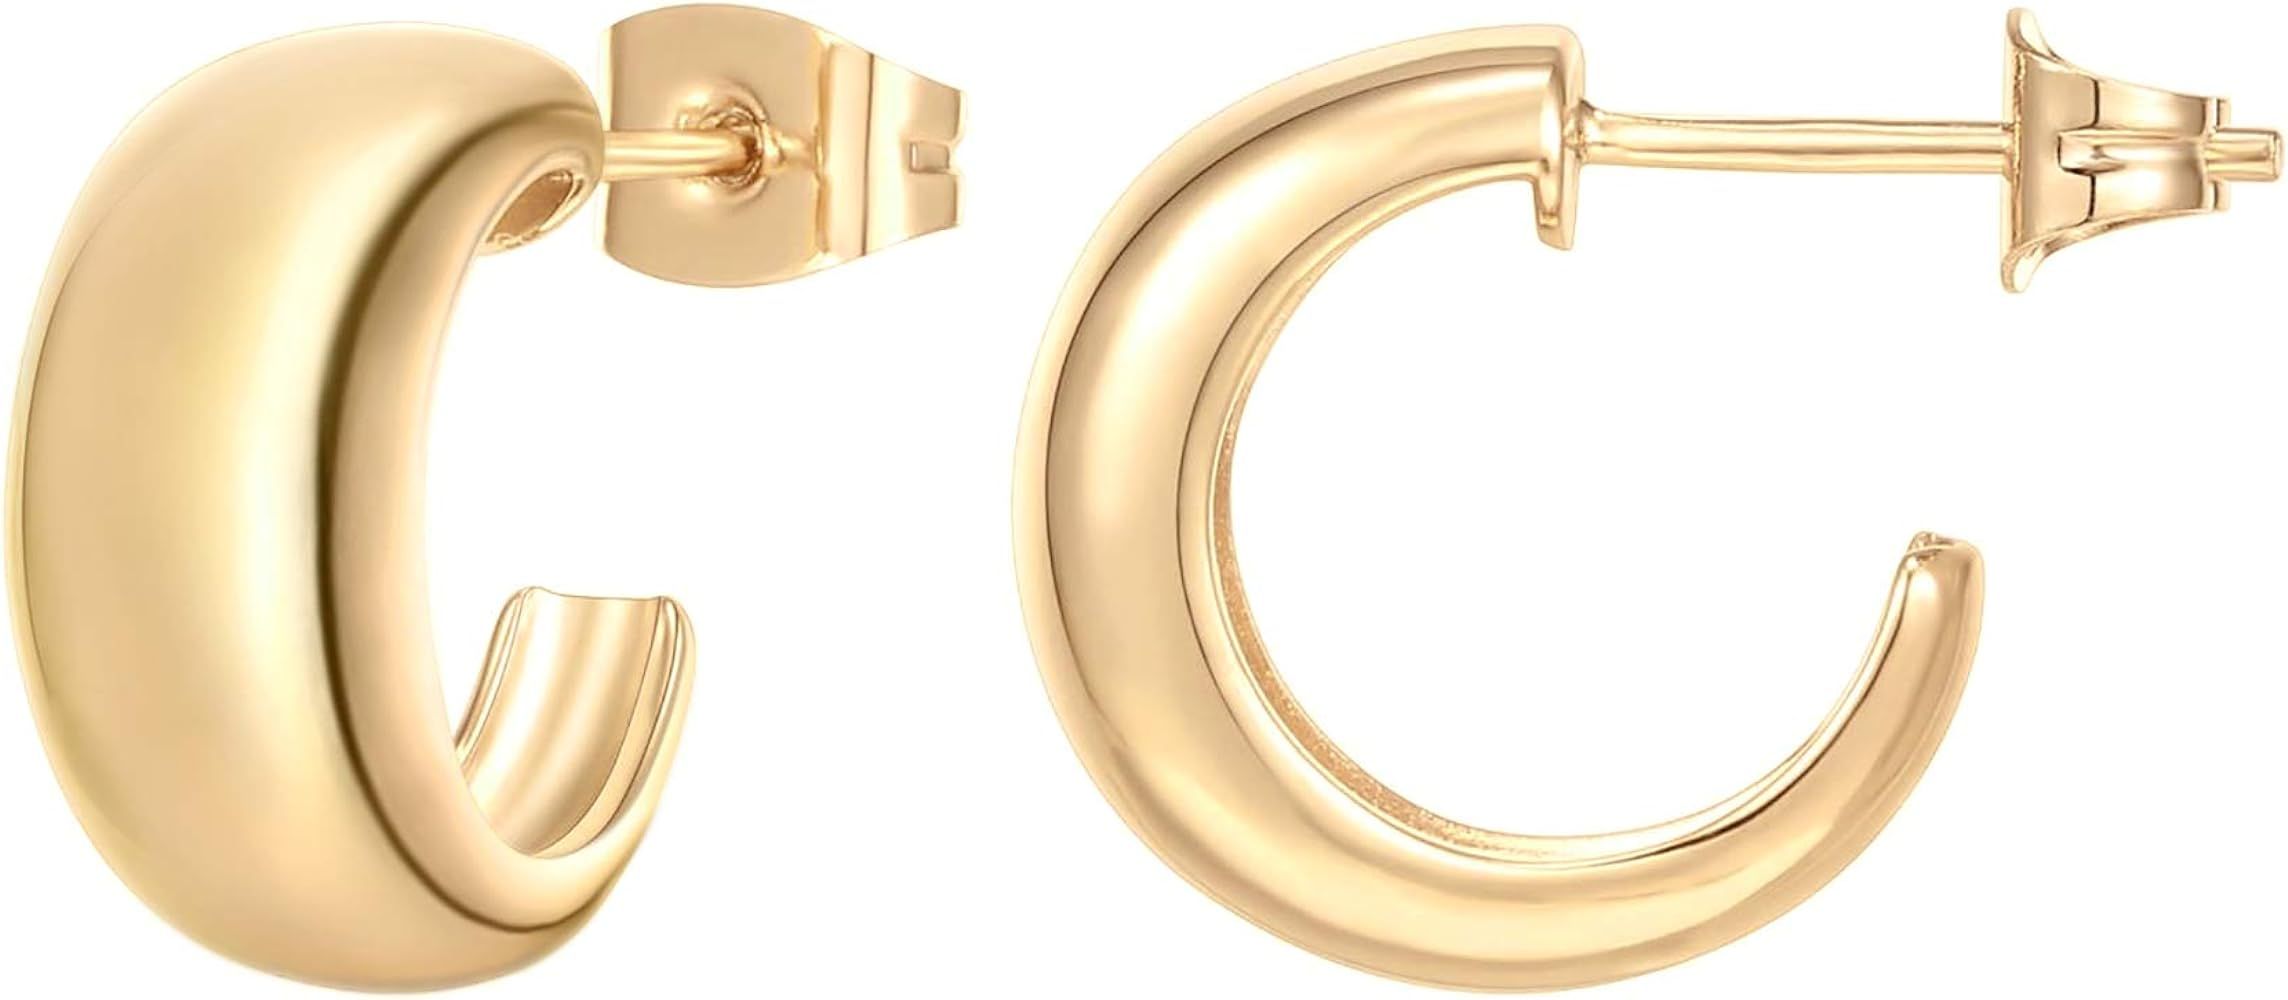 PAVOI 14K Gold Plated Sterling Silver Post Thick Huggie Earrings - Small Round Hoop Earrings in Rose | Amazon (US)